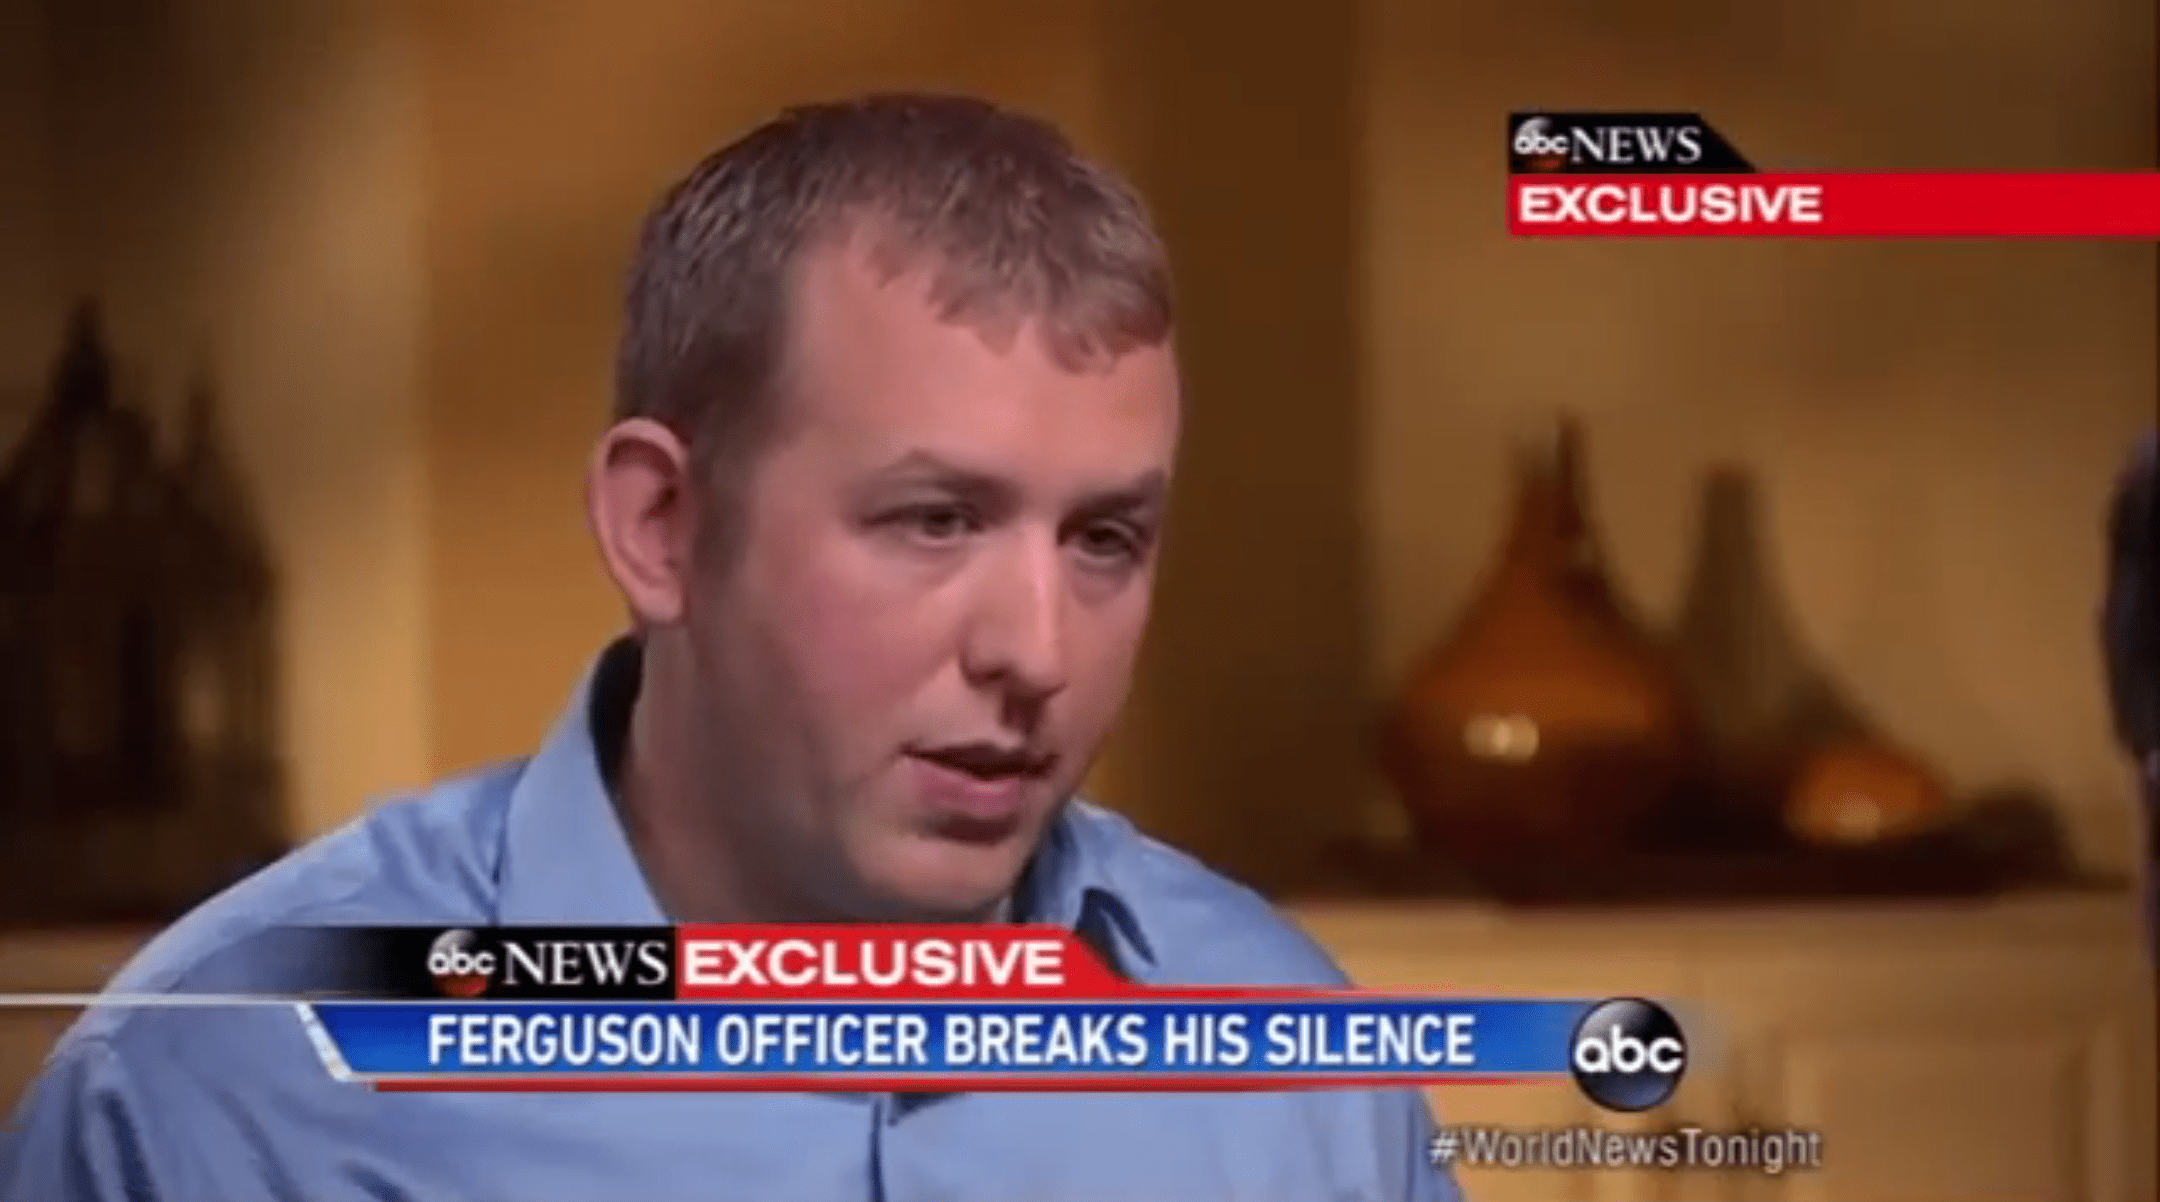 What Social Psychology Says About Darren Wilson And Michael Brown